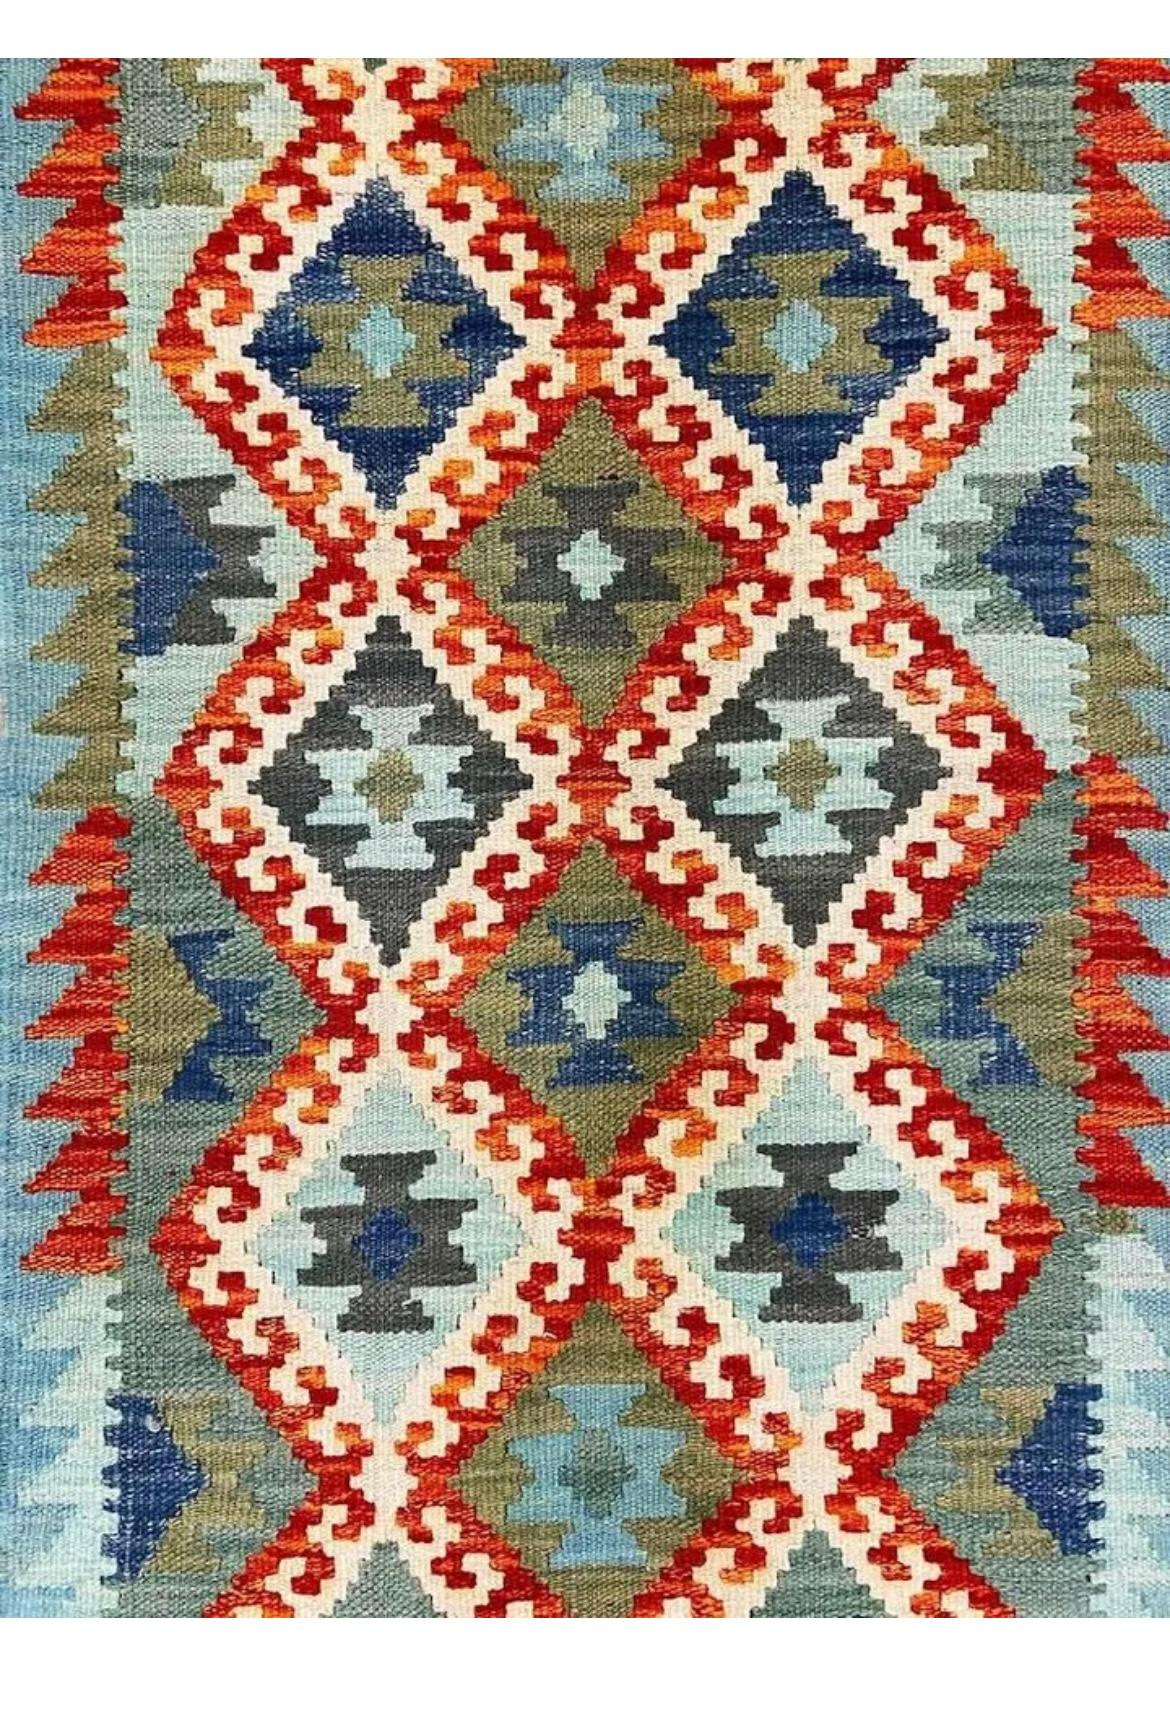 Hand-Woven All Wool Colorful Kilim Runner 2' x 6' 7